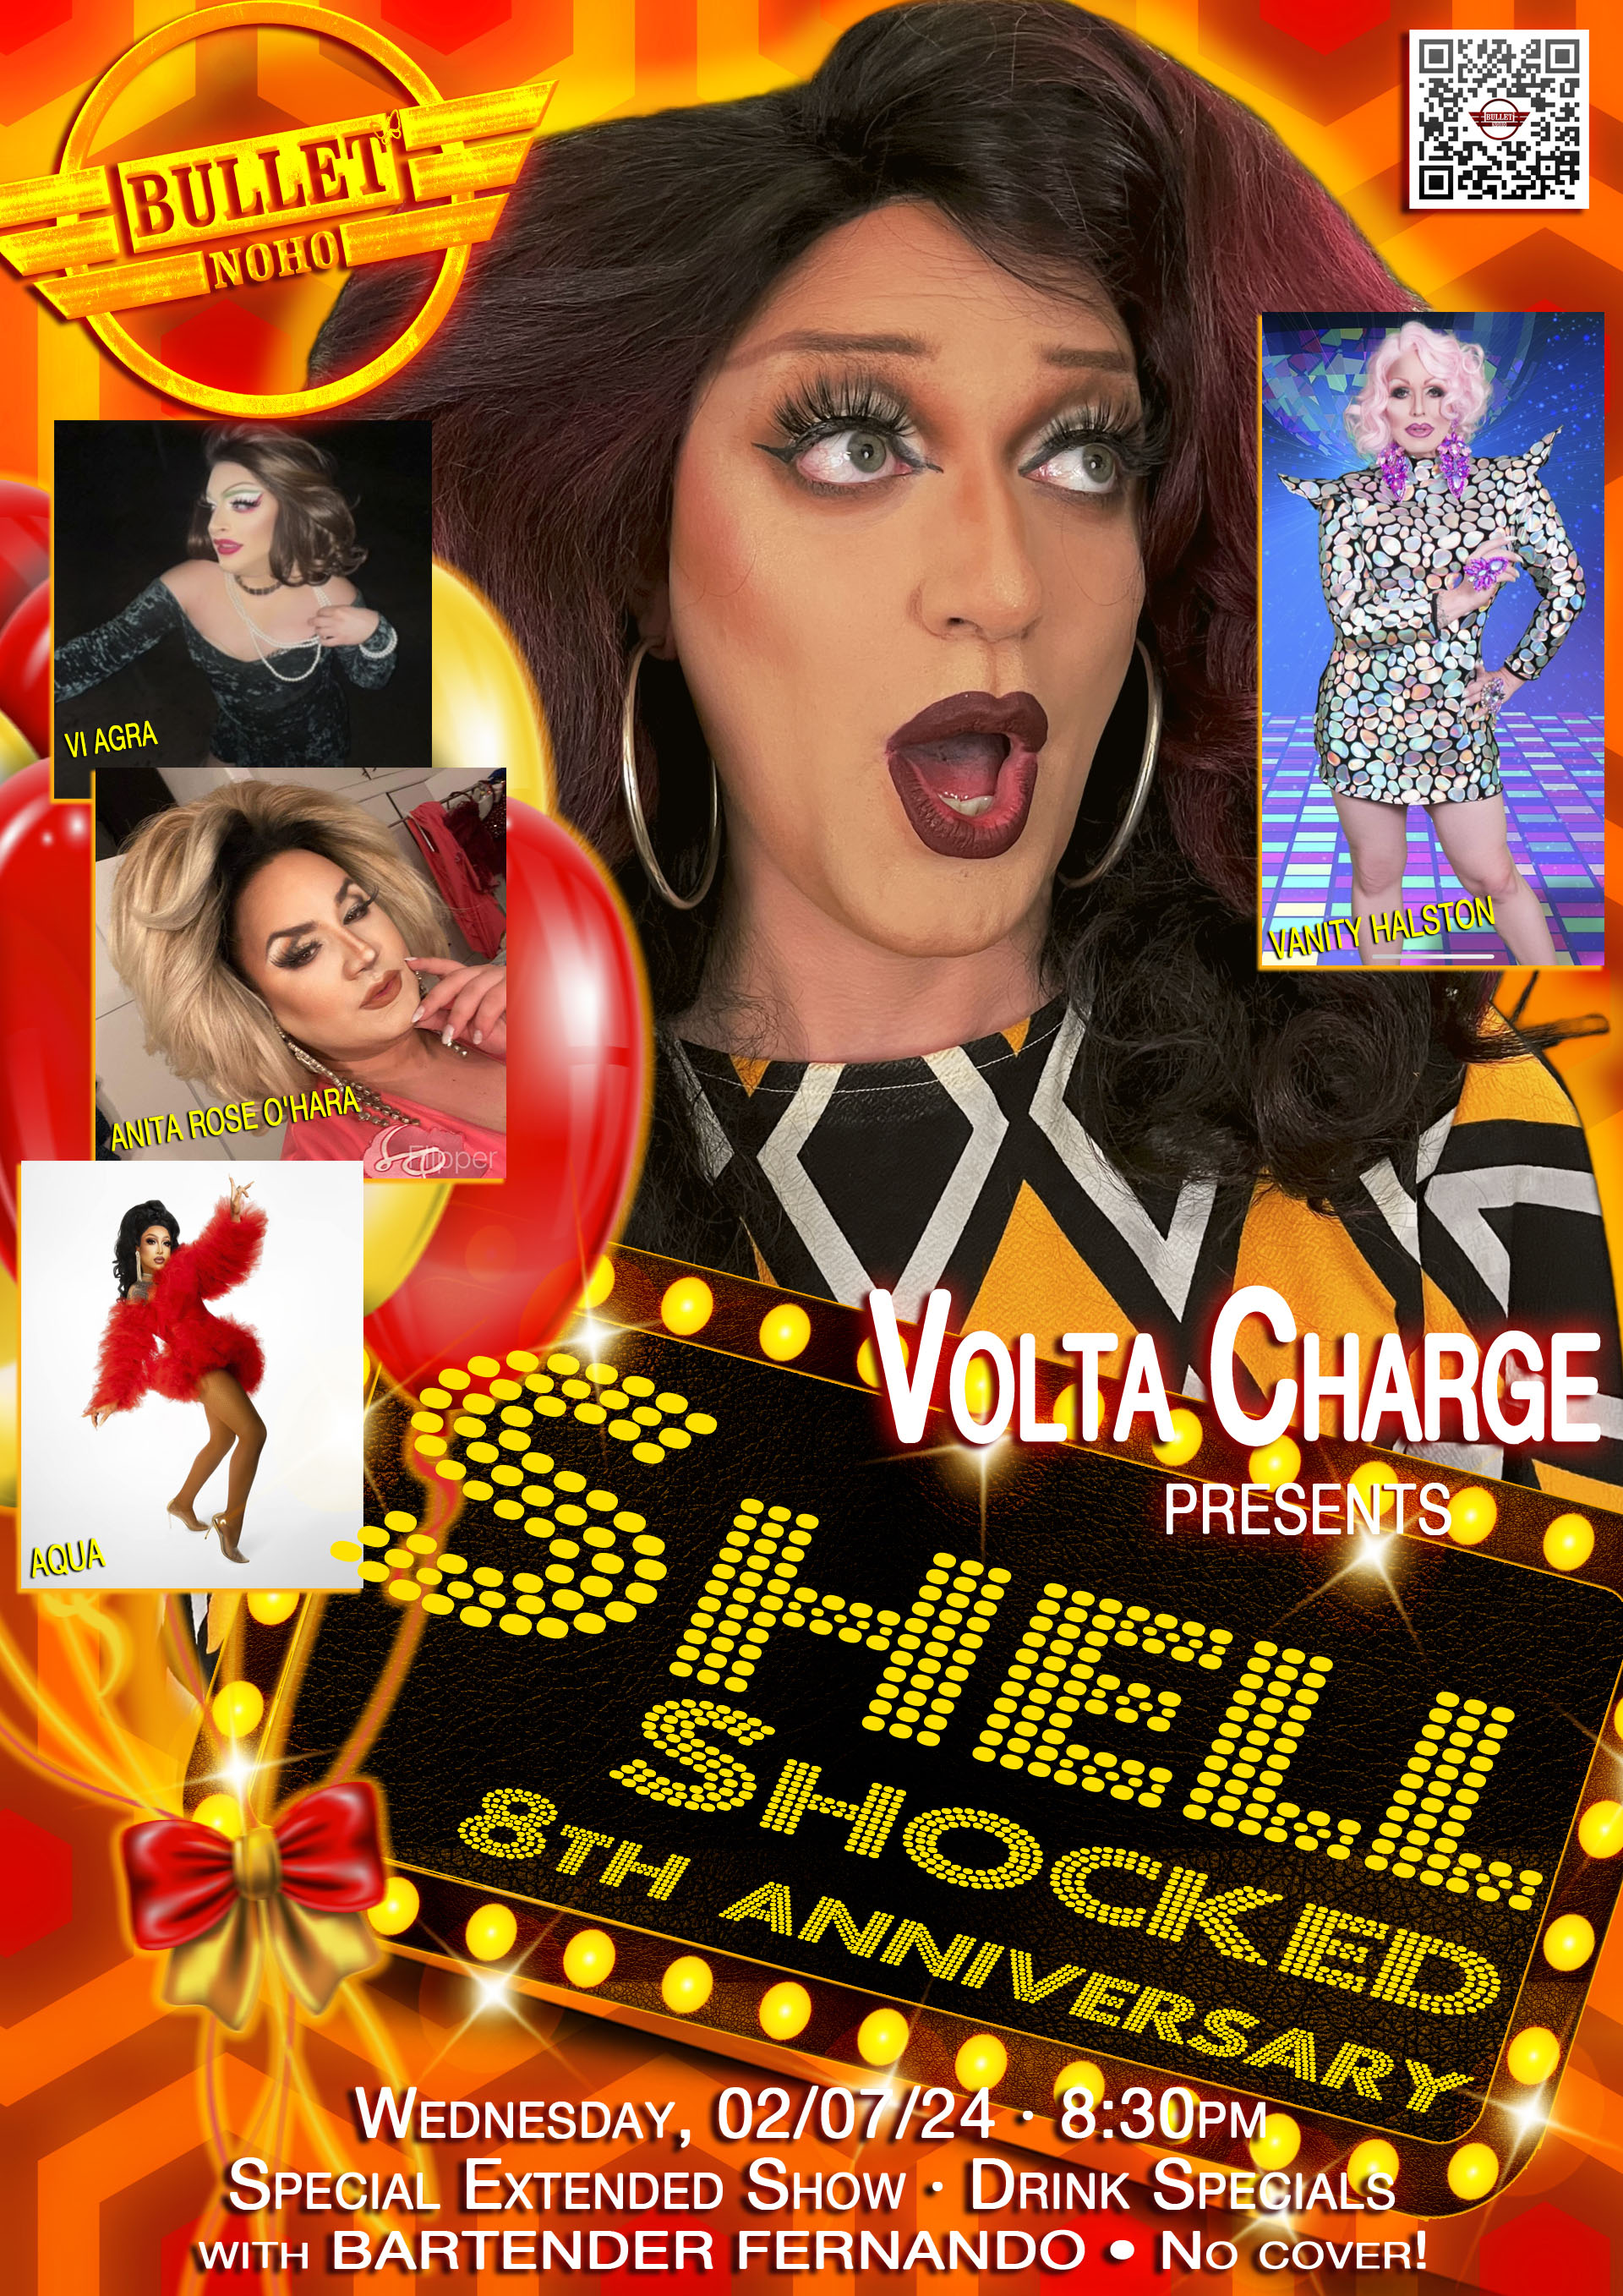 THE BULLET BAR & VOLTA CHARGE Present SHELL SHOCKED 8th ANNIVERSARY: Wednesday, 02/07/24 at 8:30 PM! Extended Show! Drink Specials! No Cover!